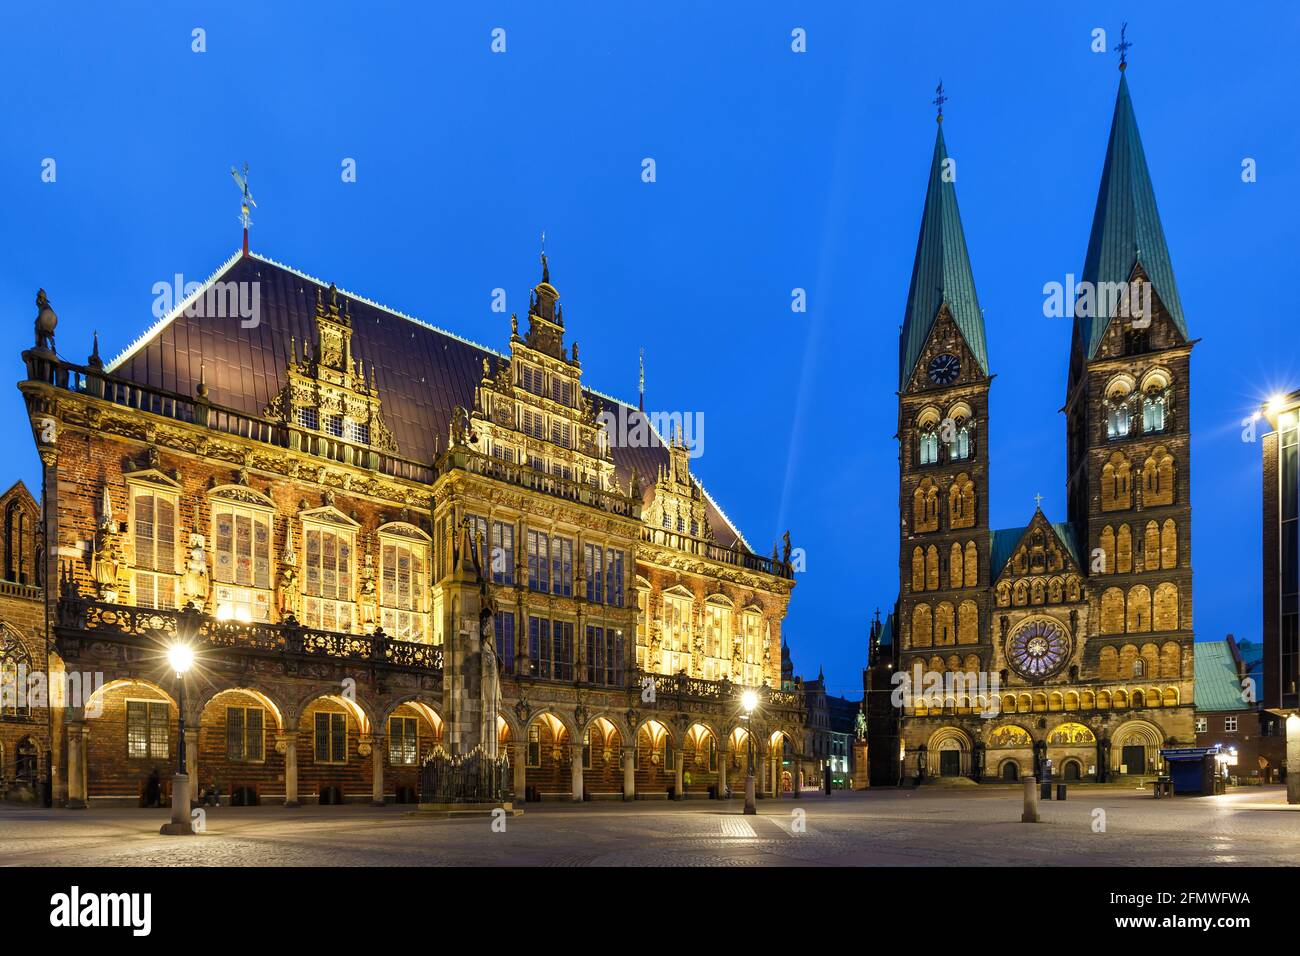 Bremen market square town hall Dom church Roland in Germany at night blue hour landmark Stock Photo